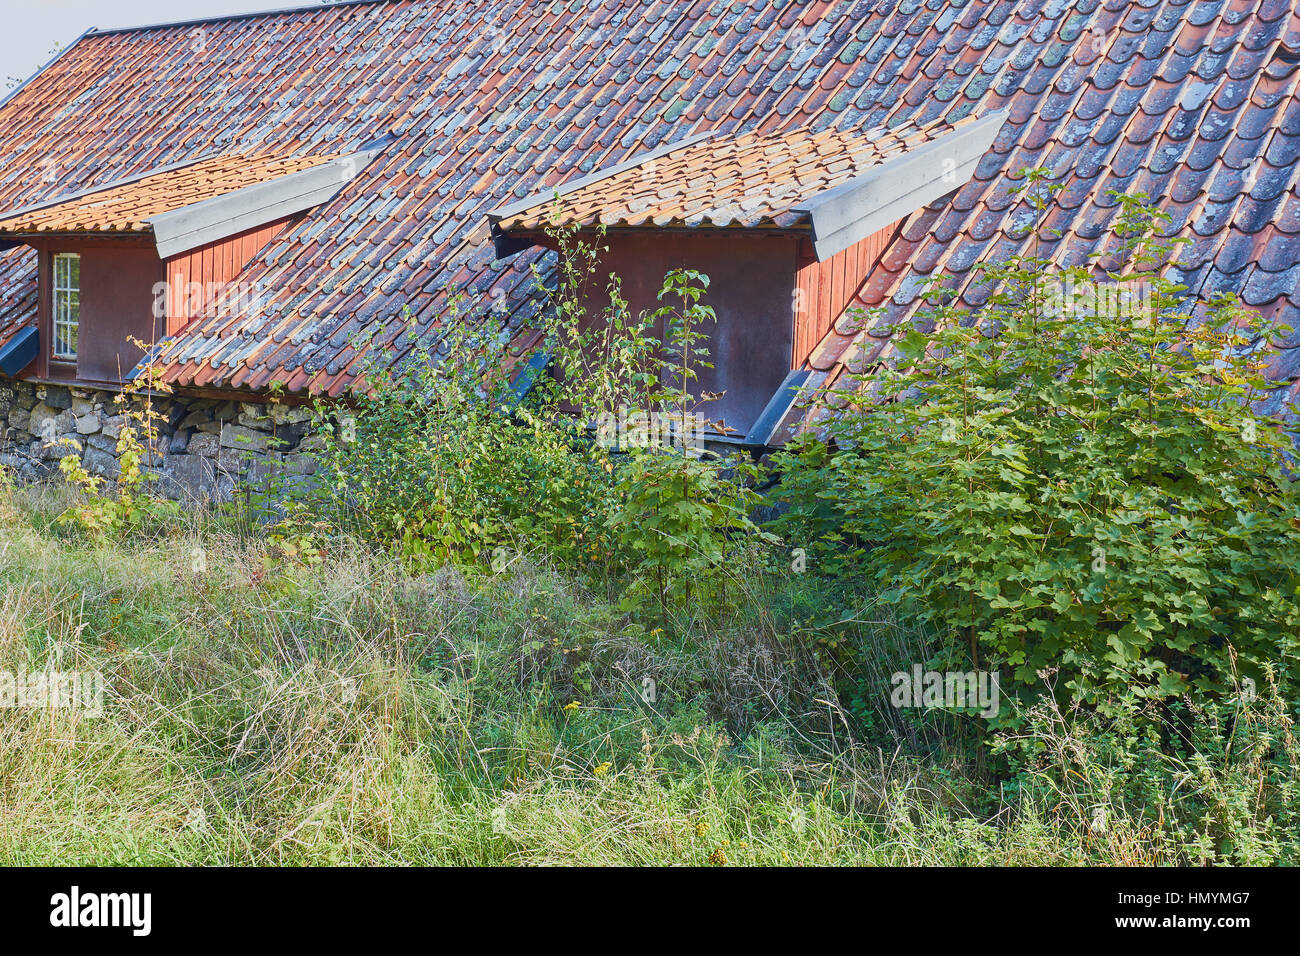 Roof of traditional house surrounded by overgrown plants, Sweden, Scandinavia Stock Photo